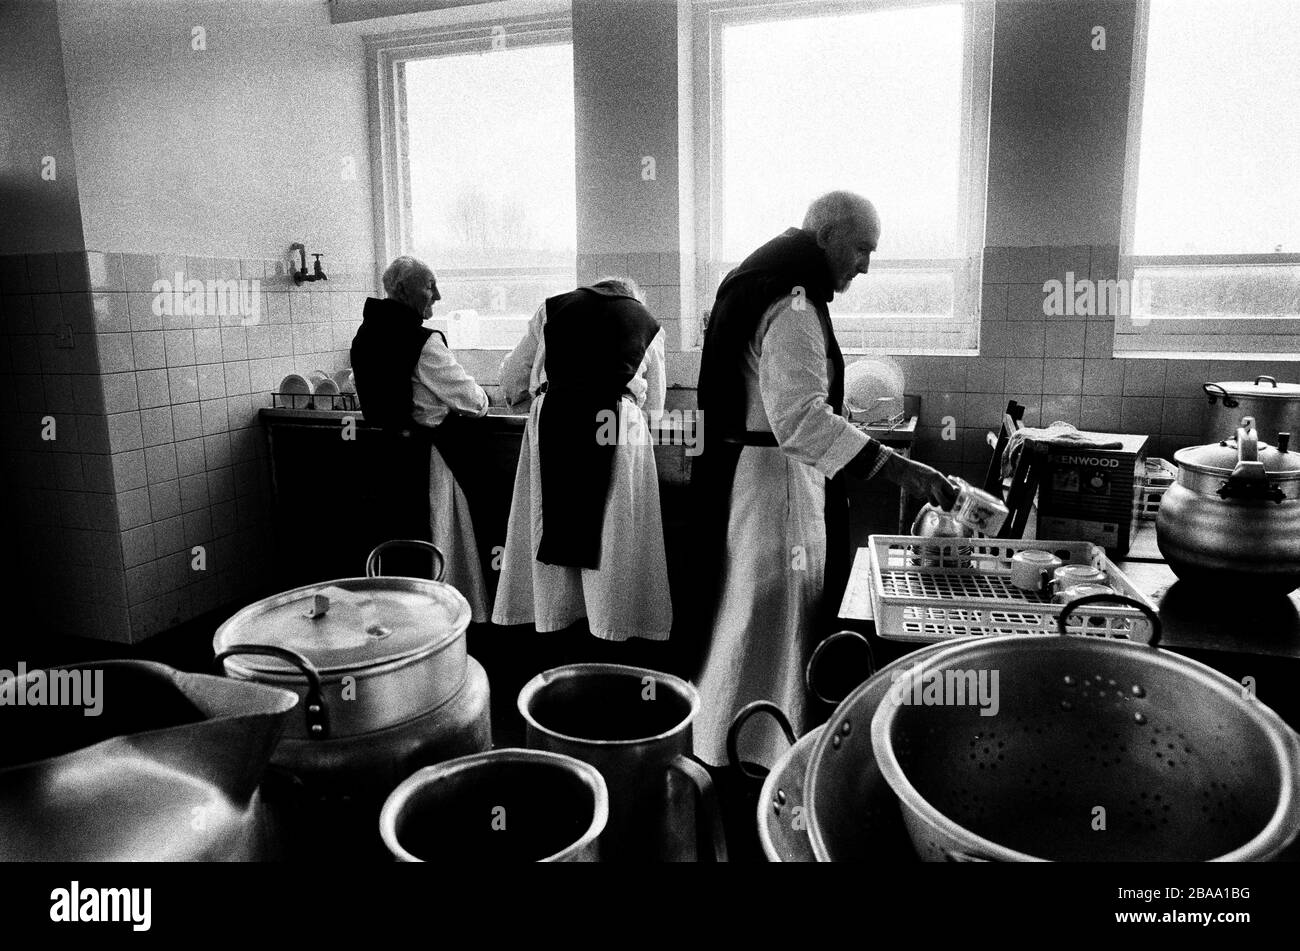 Monks working in the kitchen at Sancta Maria Abbey at Nunraw, East Lothian, home since 1946 to the Order of Cistercians of the Strict Observance. Around 15 monks were resident at Nunraw in 1996, undertaking a mixture of daily tasks and strict religious observance. The present purpose-built building dates from 1969 when the monks moved from the nearby Nunraw house. Stock Photo